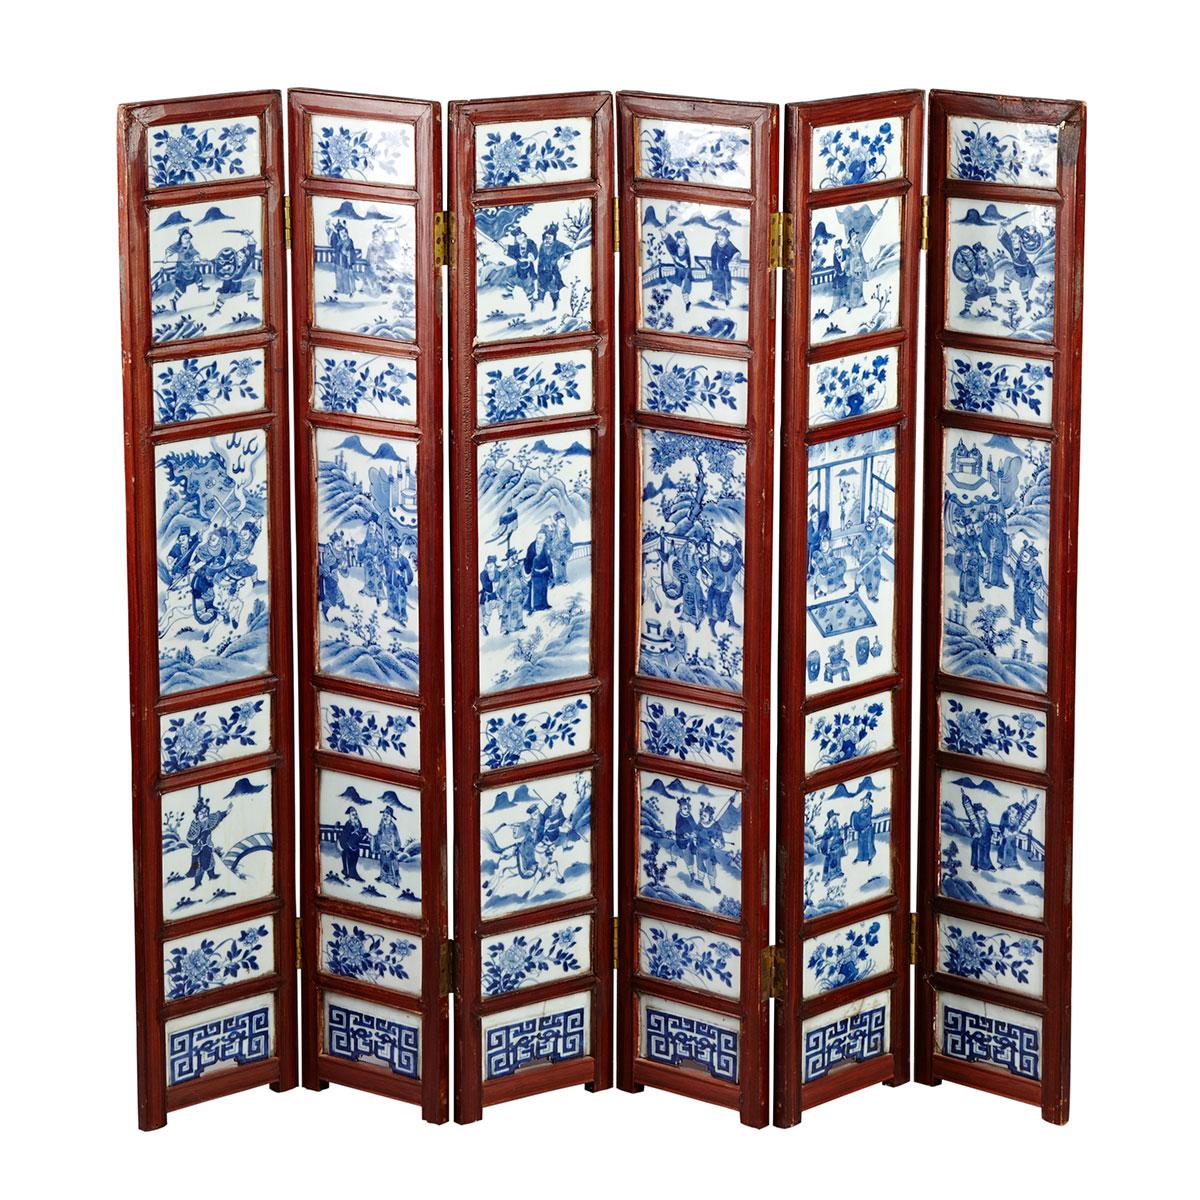 Six Panel Blue and White Porcelain Inlay Table Screen, 19th Century